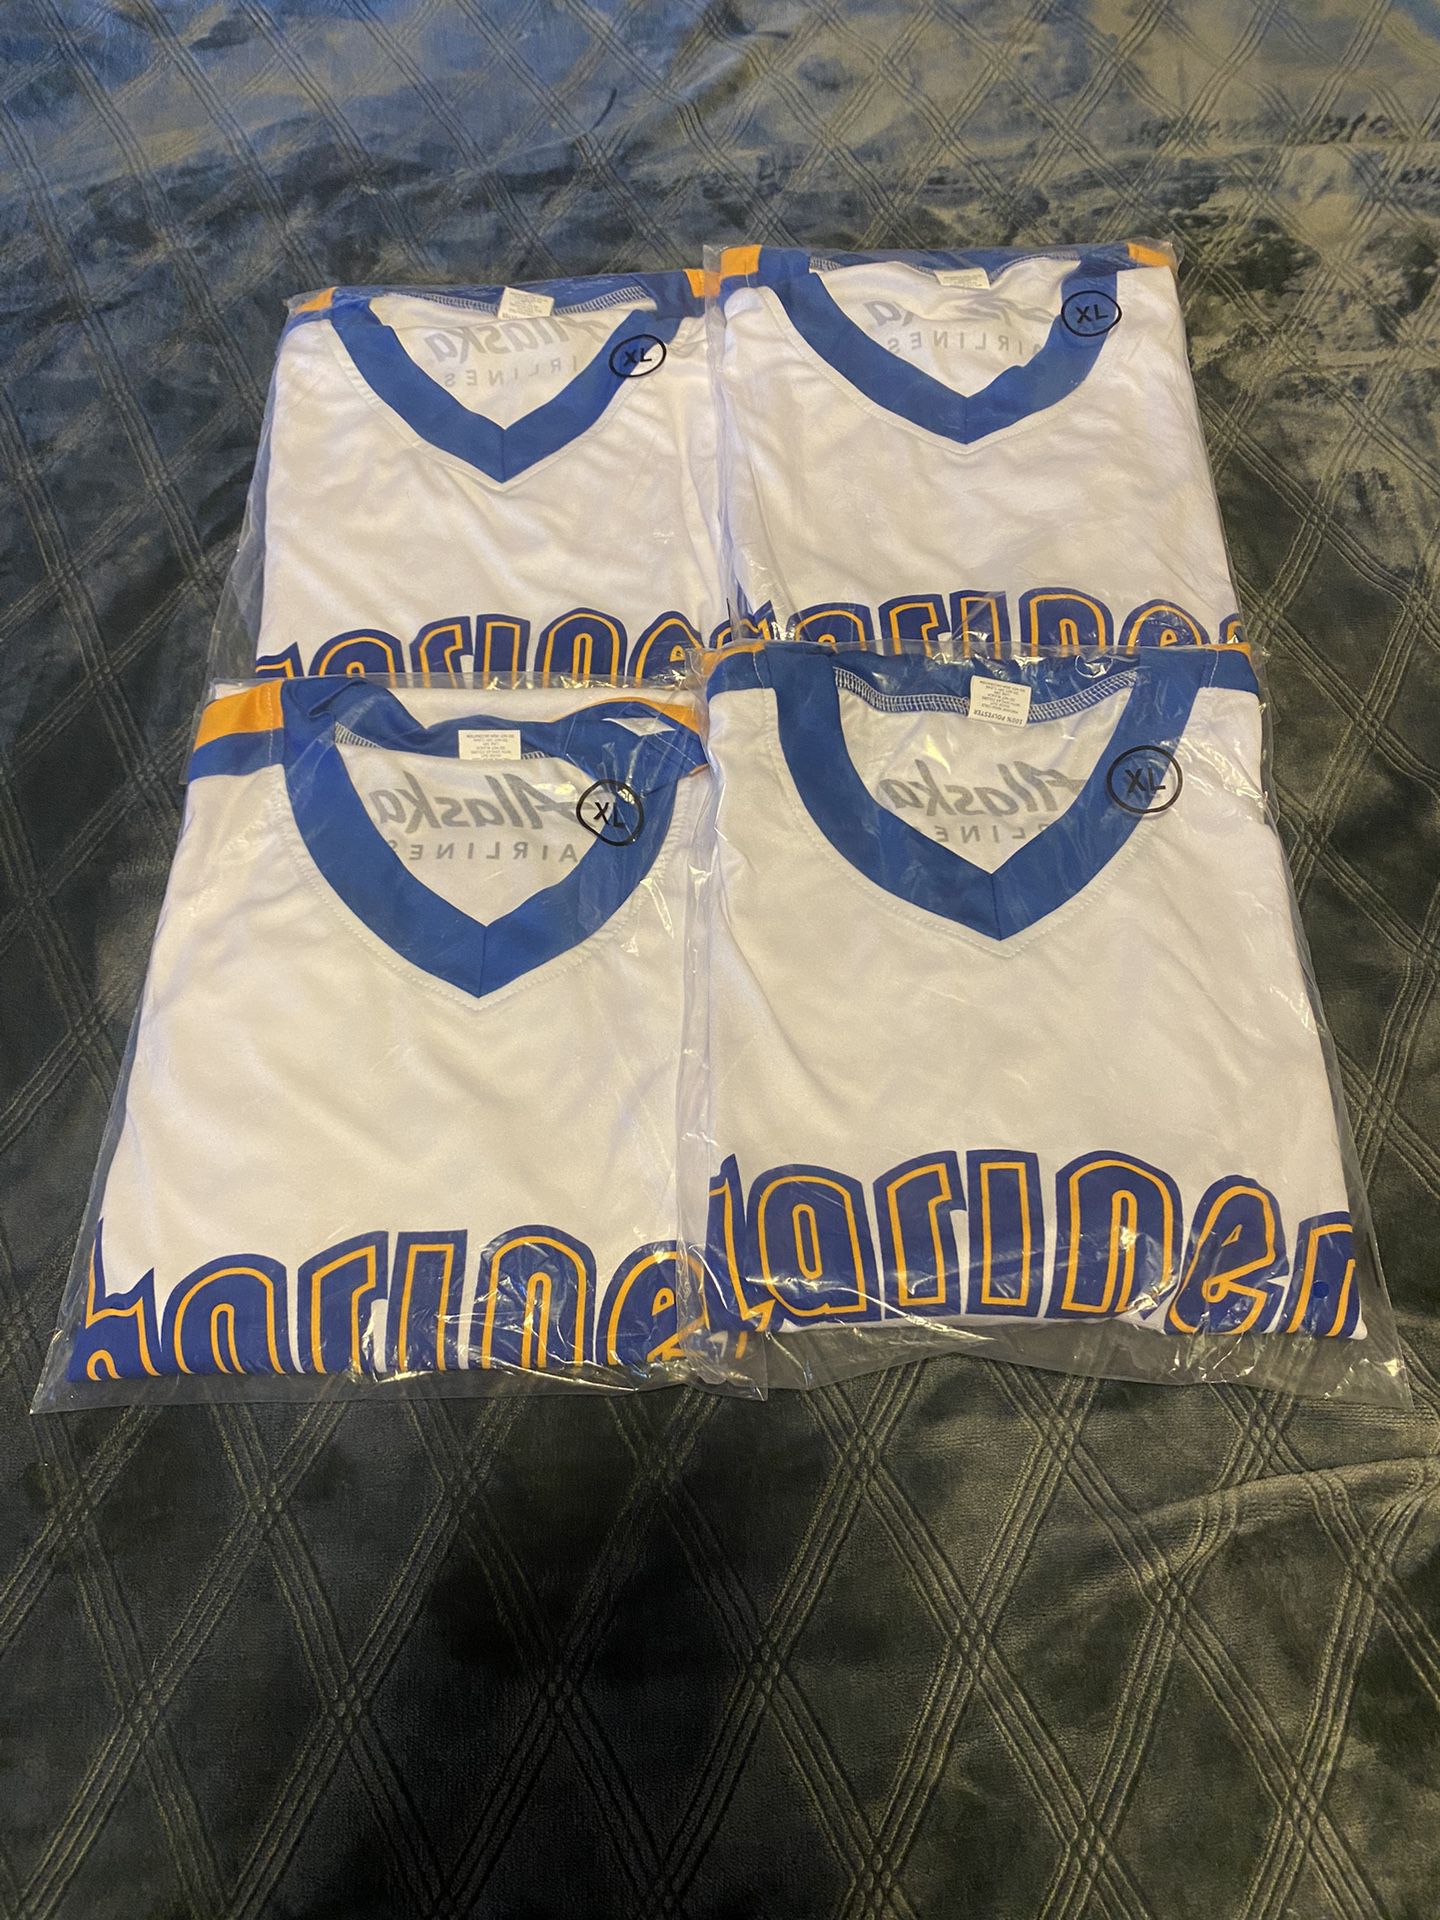 Seattle Mariners Retro Jersey(s) for Sale in Snohomish, WA - OfferUp